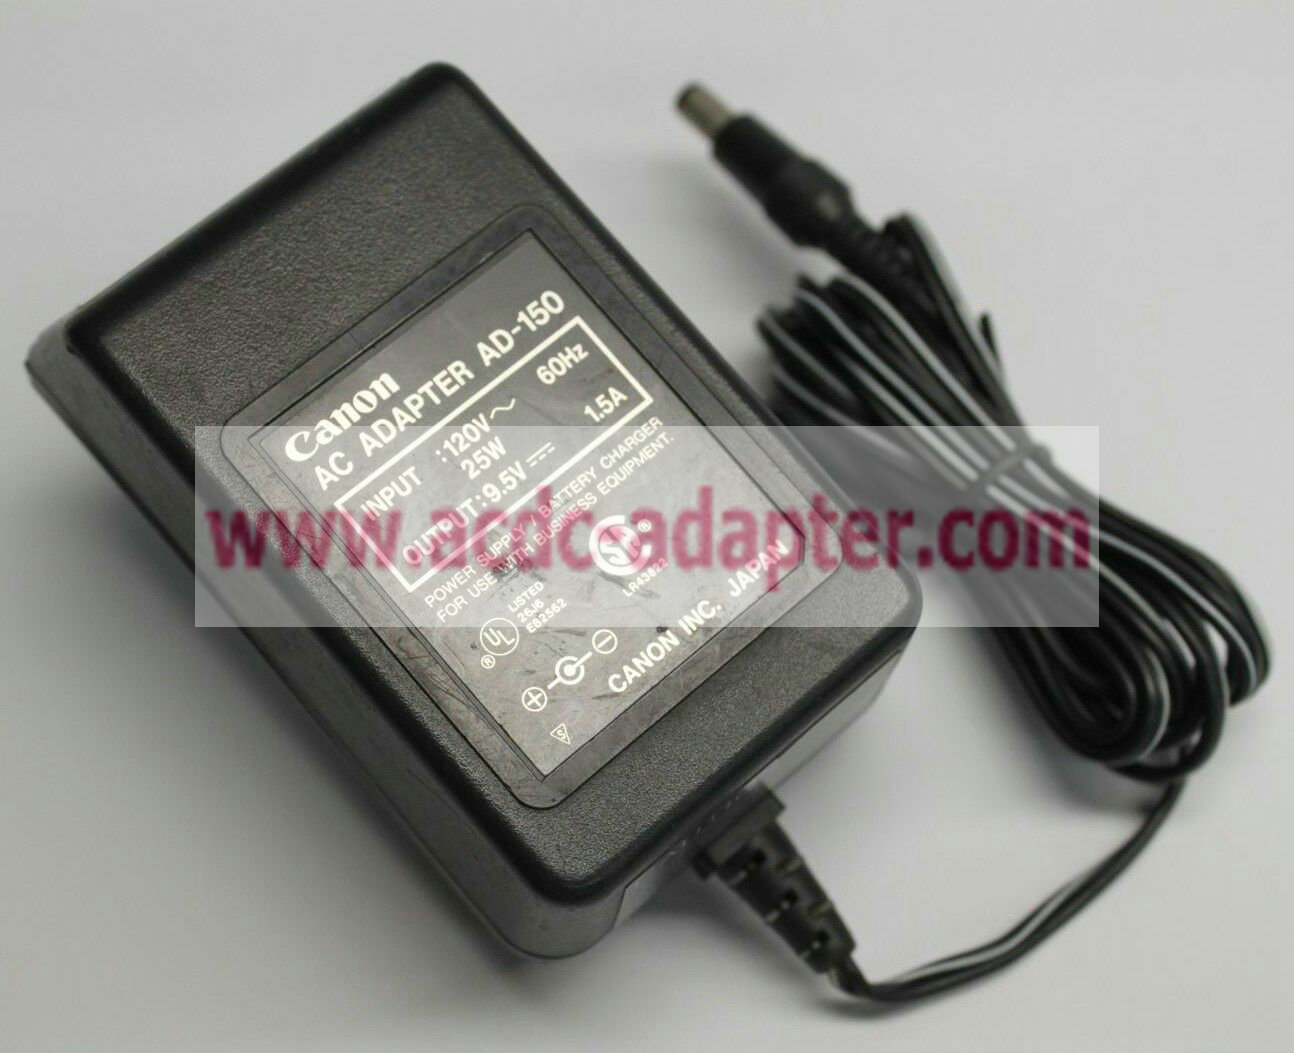 New DC 9.5V 1.5A 30W AC Adapter for Canon AD-150 Power Supply Battery Charger - Click Image to Close